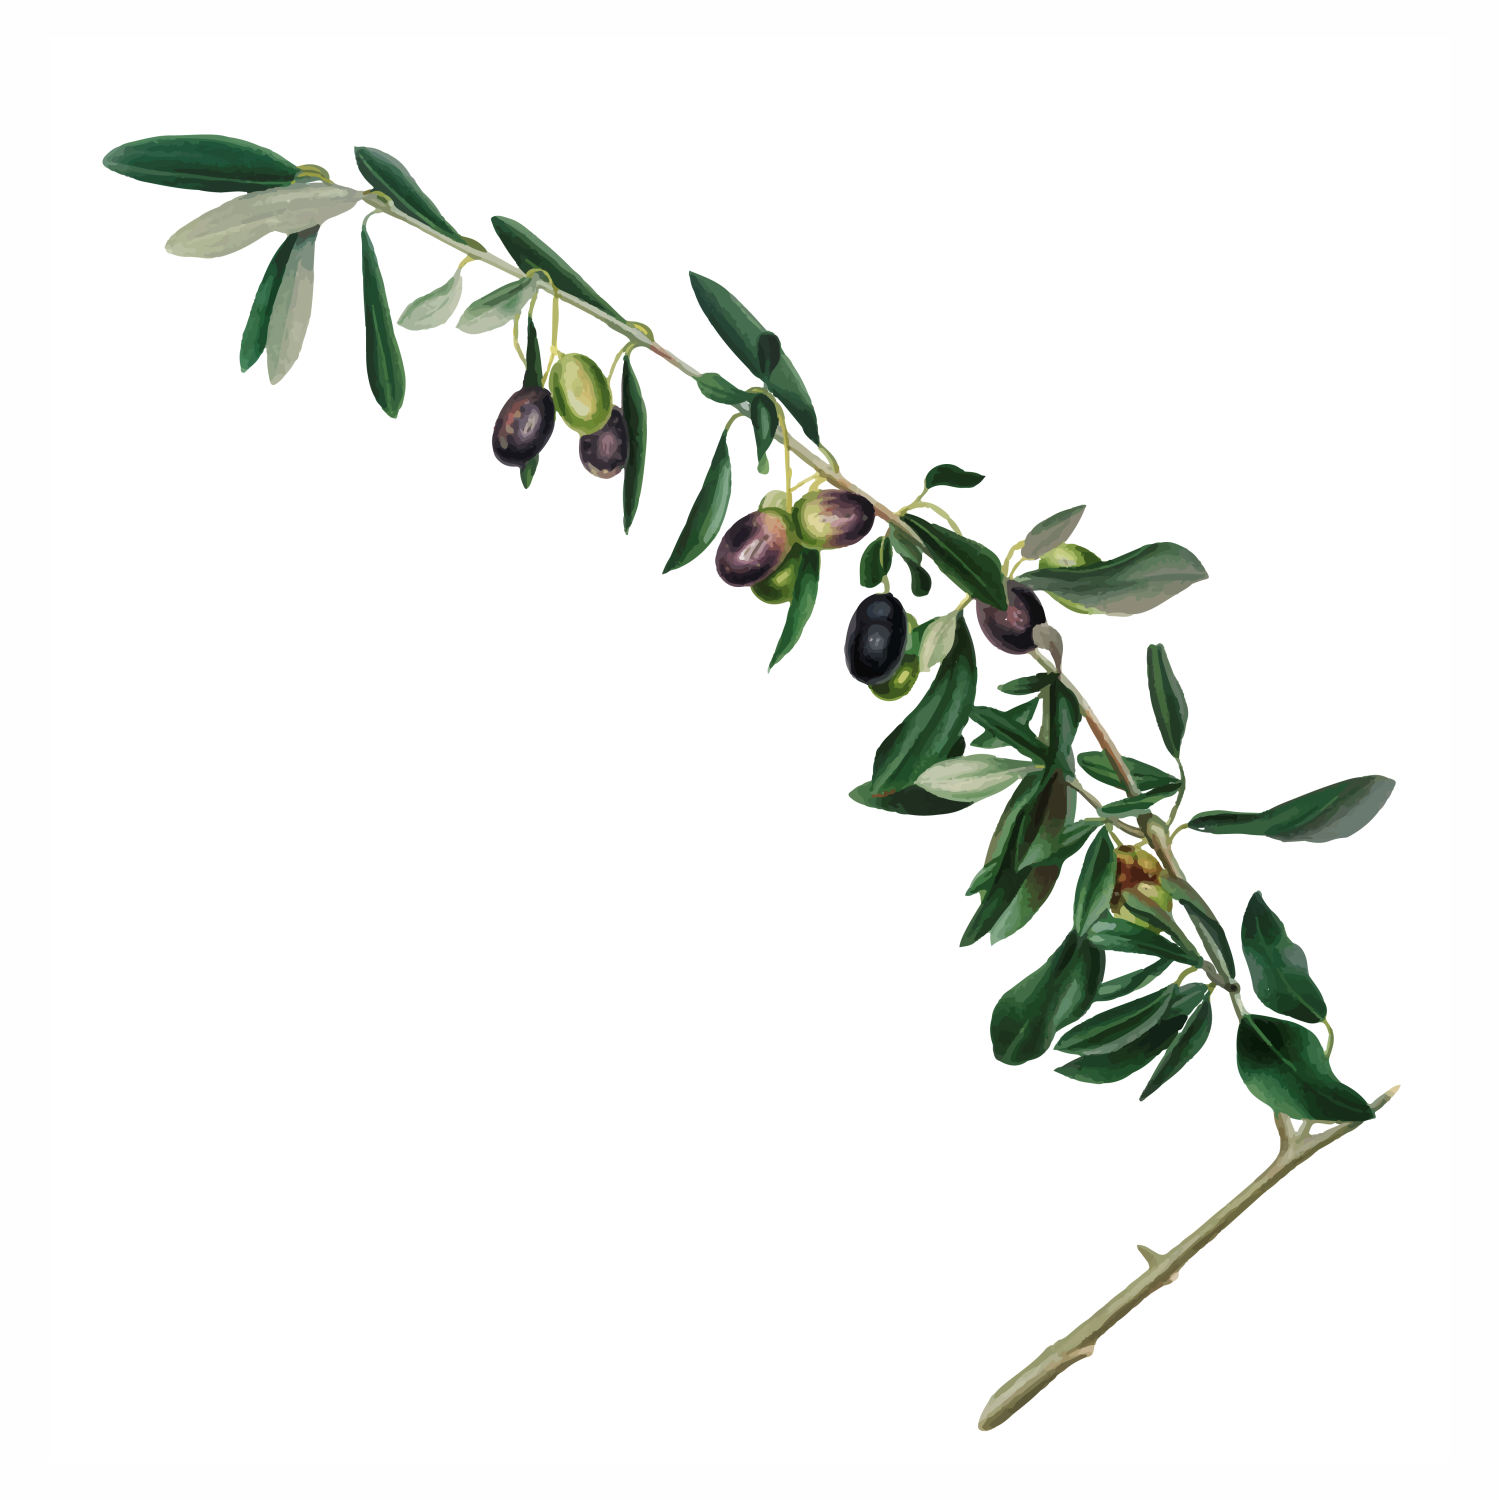 Olea Europaea (Olive) Leaf Extract: From Olive Branch to Luminous Skin